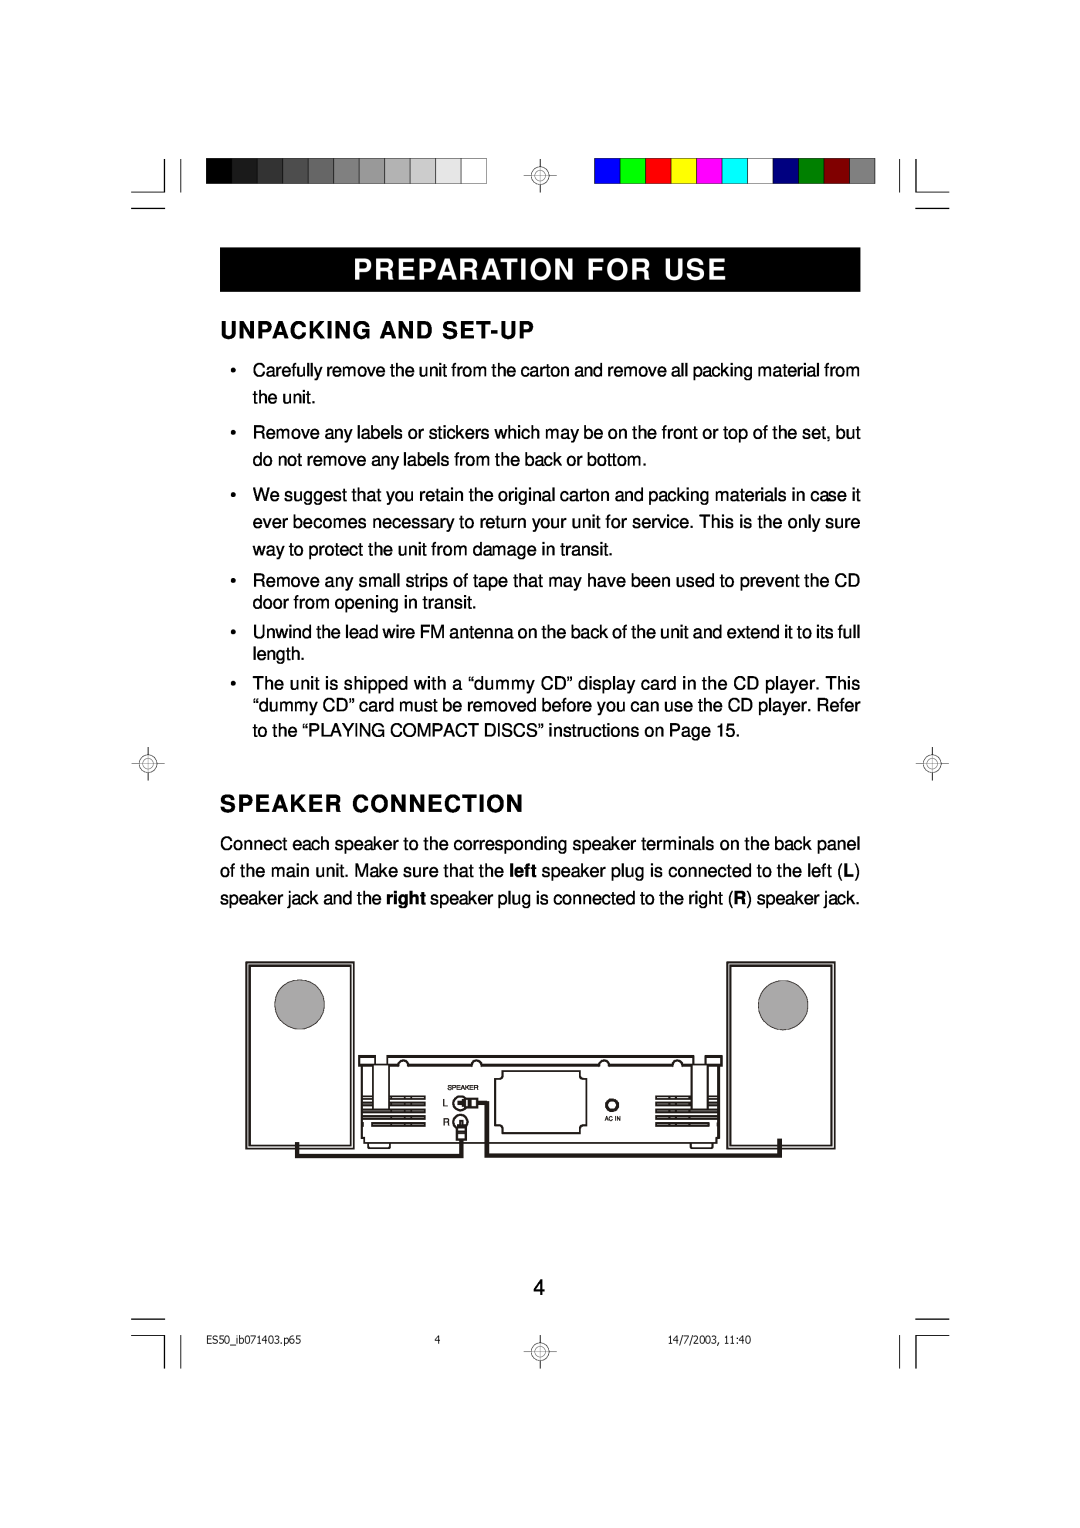 Emerson ES50 owner manual Preparation For Use, Unpacking And Set-Up, Speaker Connection 